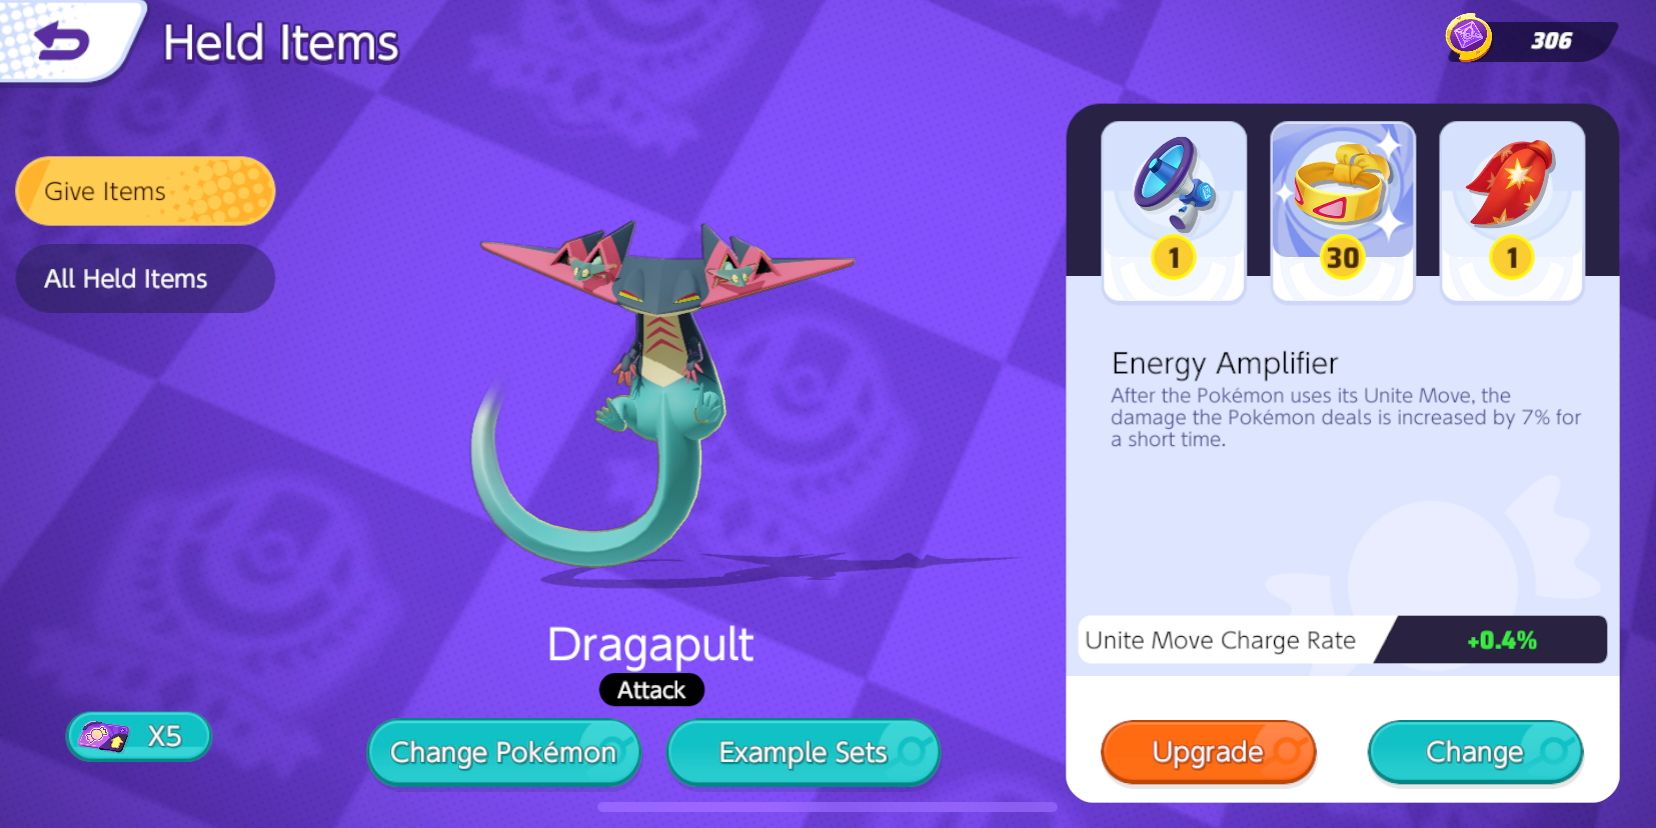 Dragapult Held Item selection screen from Pokemon Unite, with Energy Amp, Muscle Band, and Rapid Fire Scarf